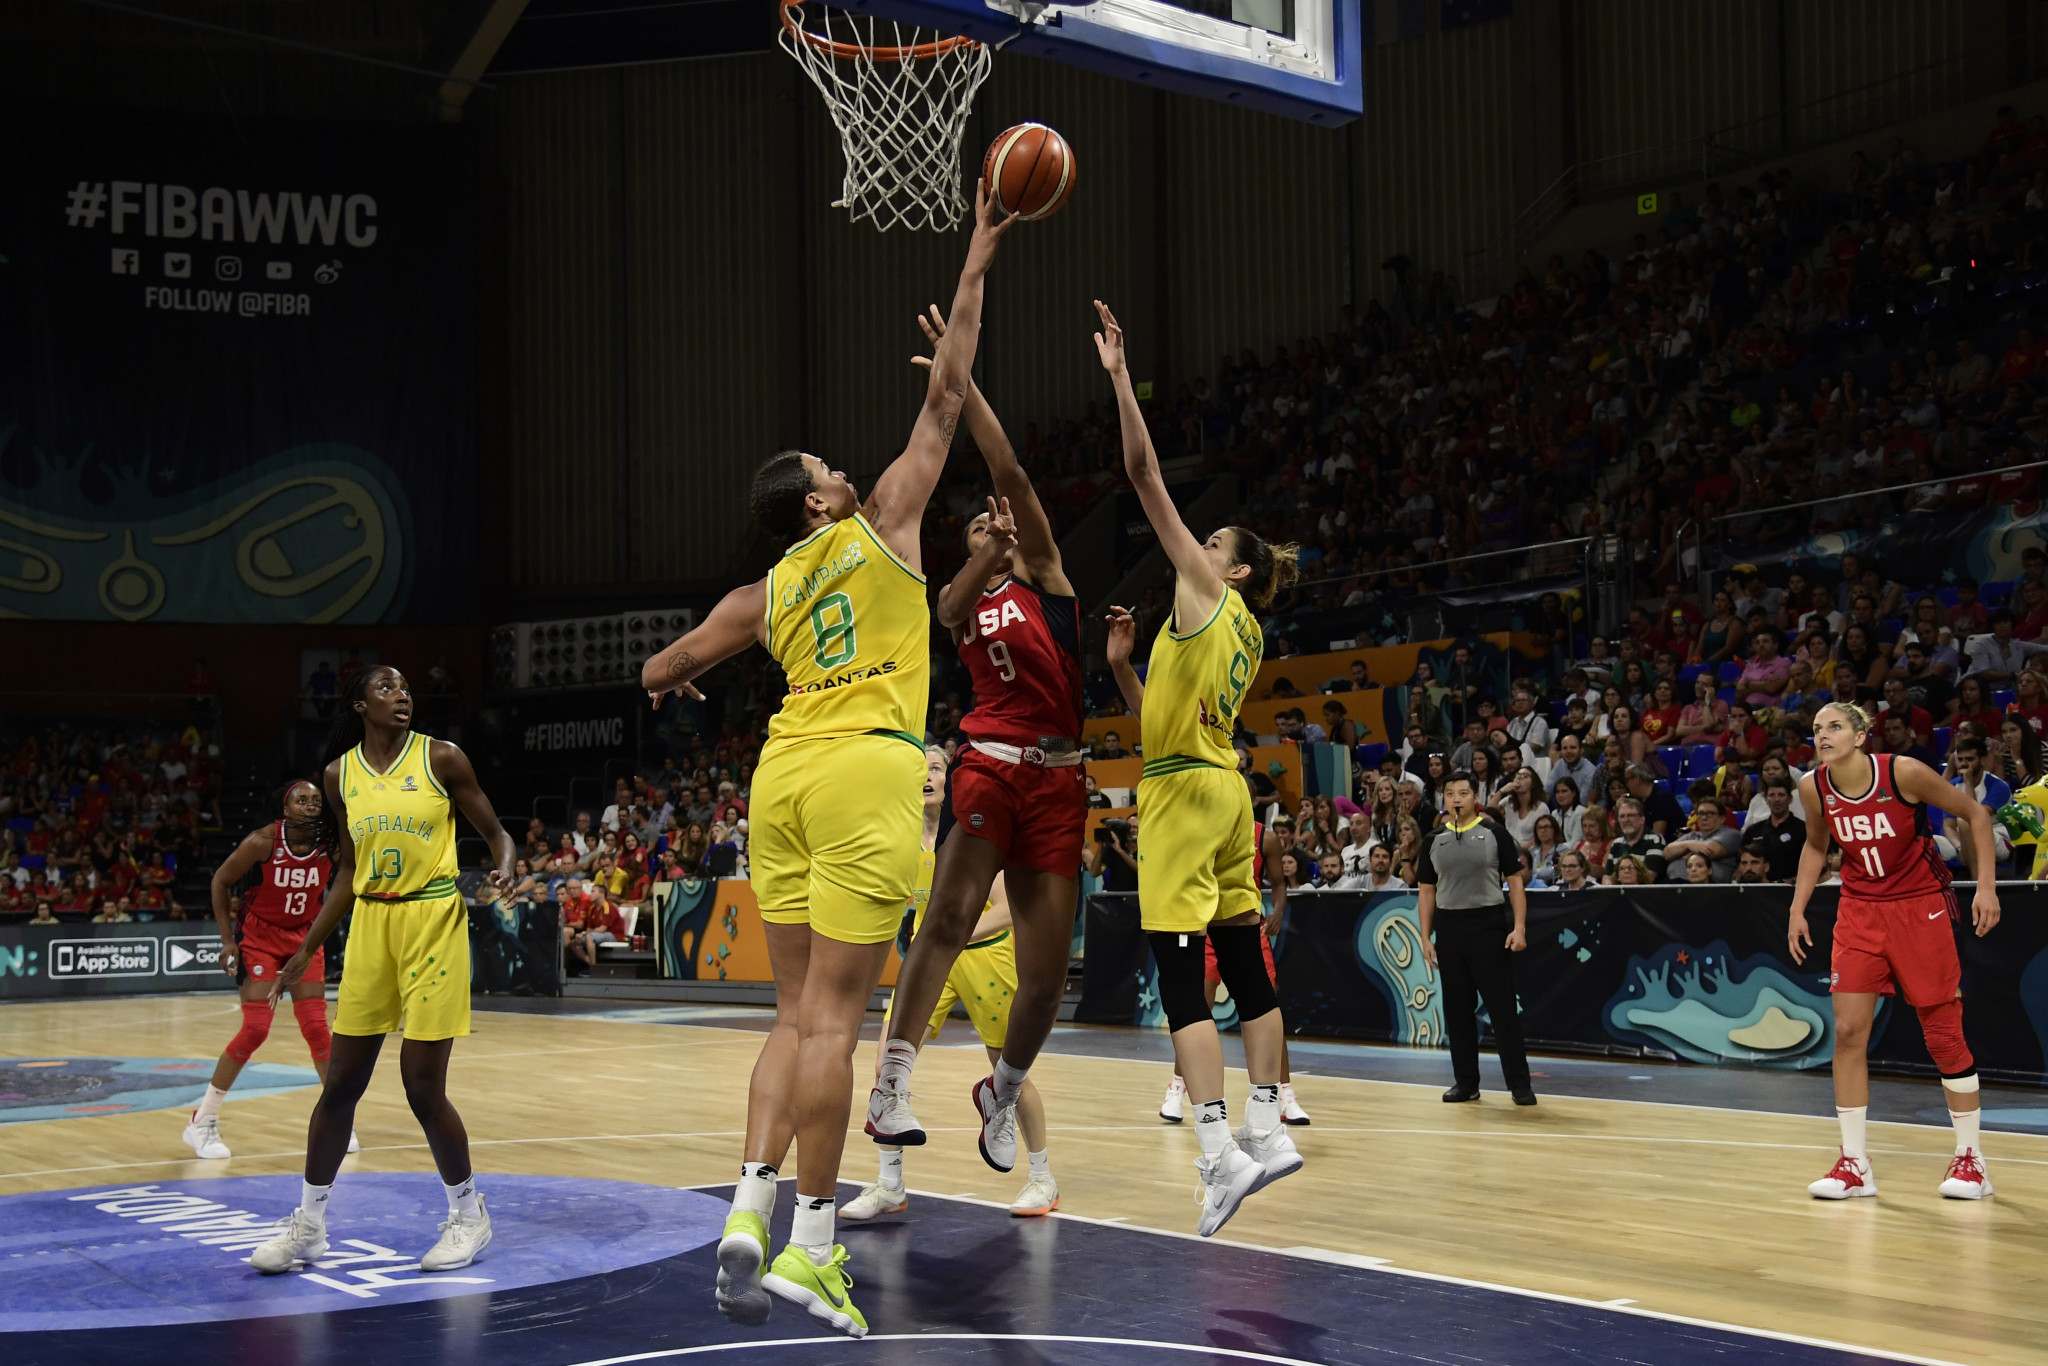 FIBA launches "Nothing Beats Like It" campaign for 2022 Women's World Cup in Sydney